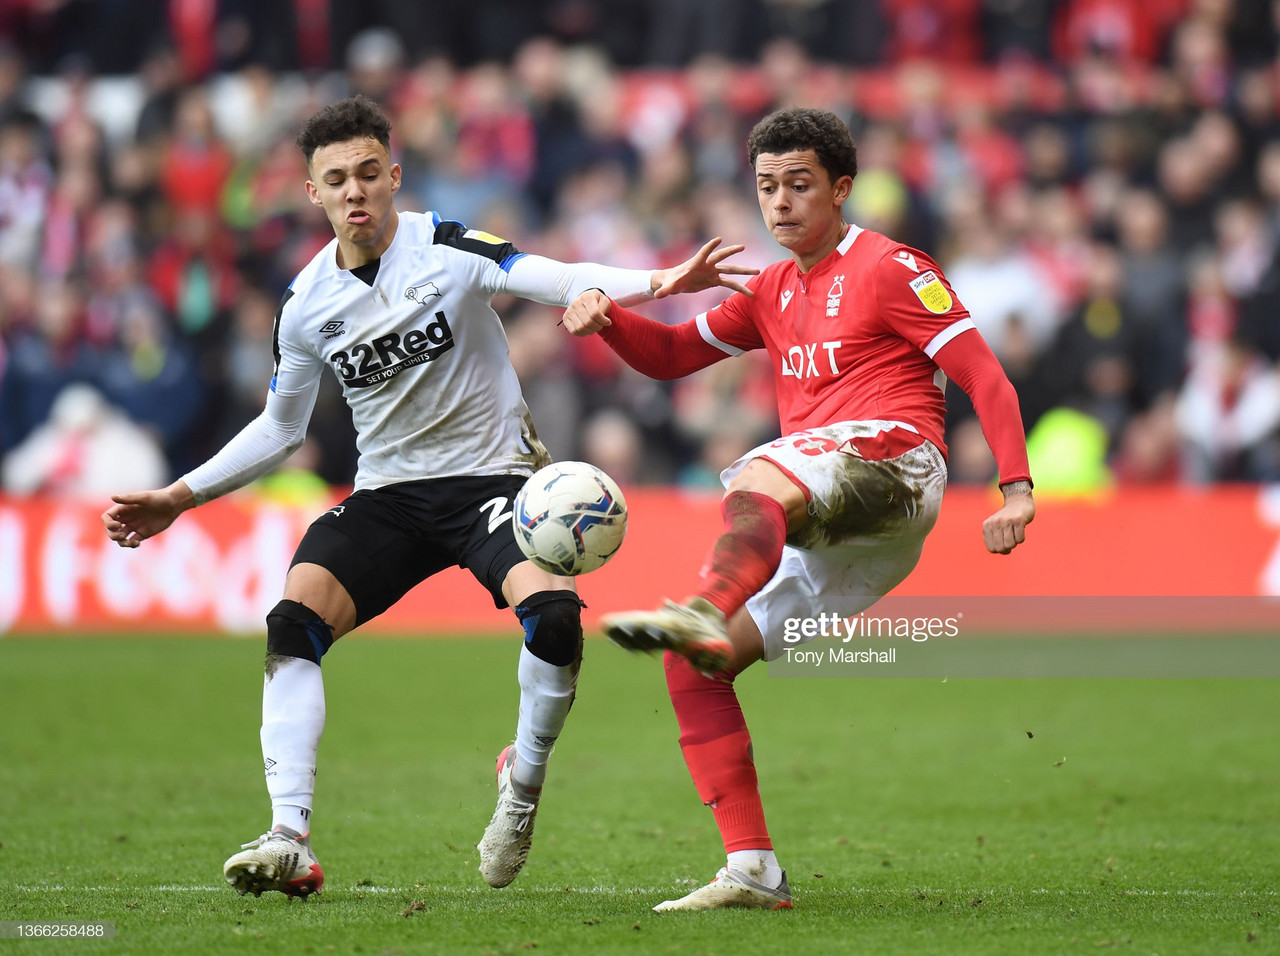 Nottingham Forest 2-1 Derby County: Reds win ugly East Midlands derby